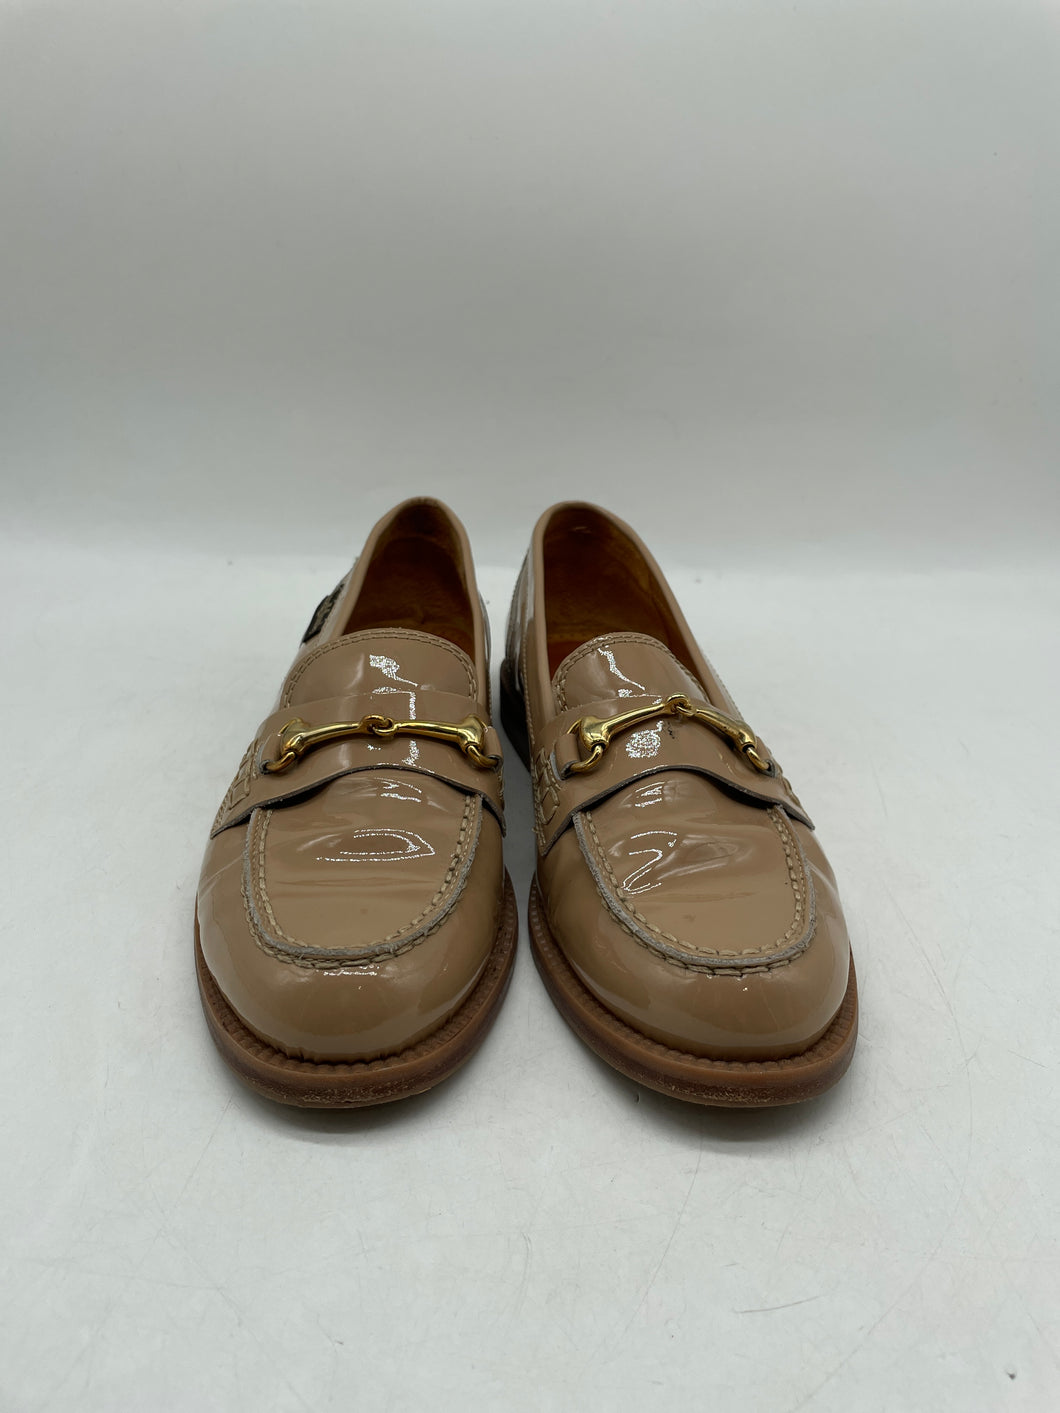 Russell & Bromley Womens Beige Leather Round Toe Slip On Loafer Shoes Sz EUR 36